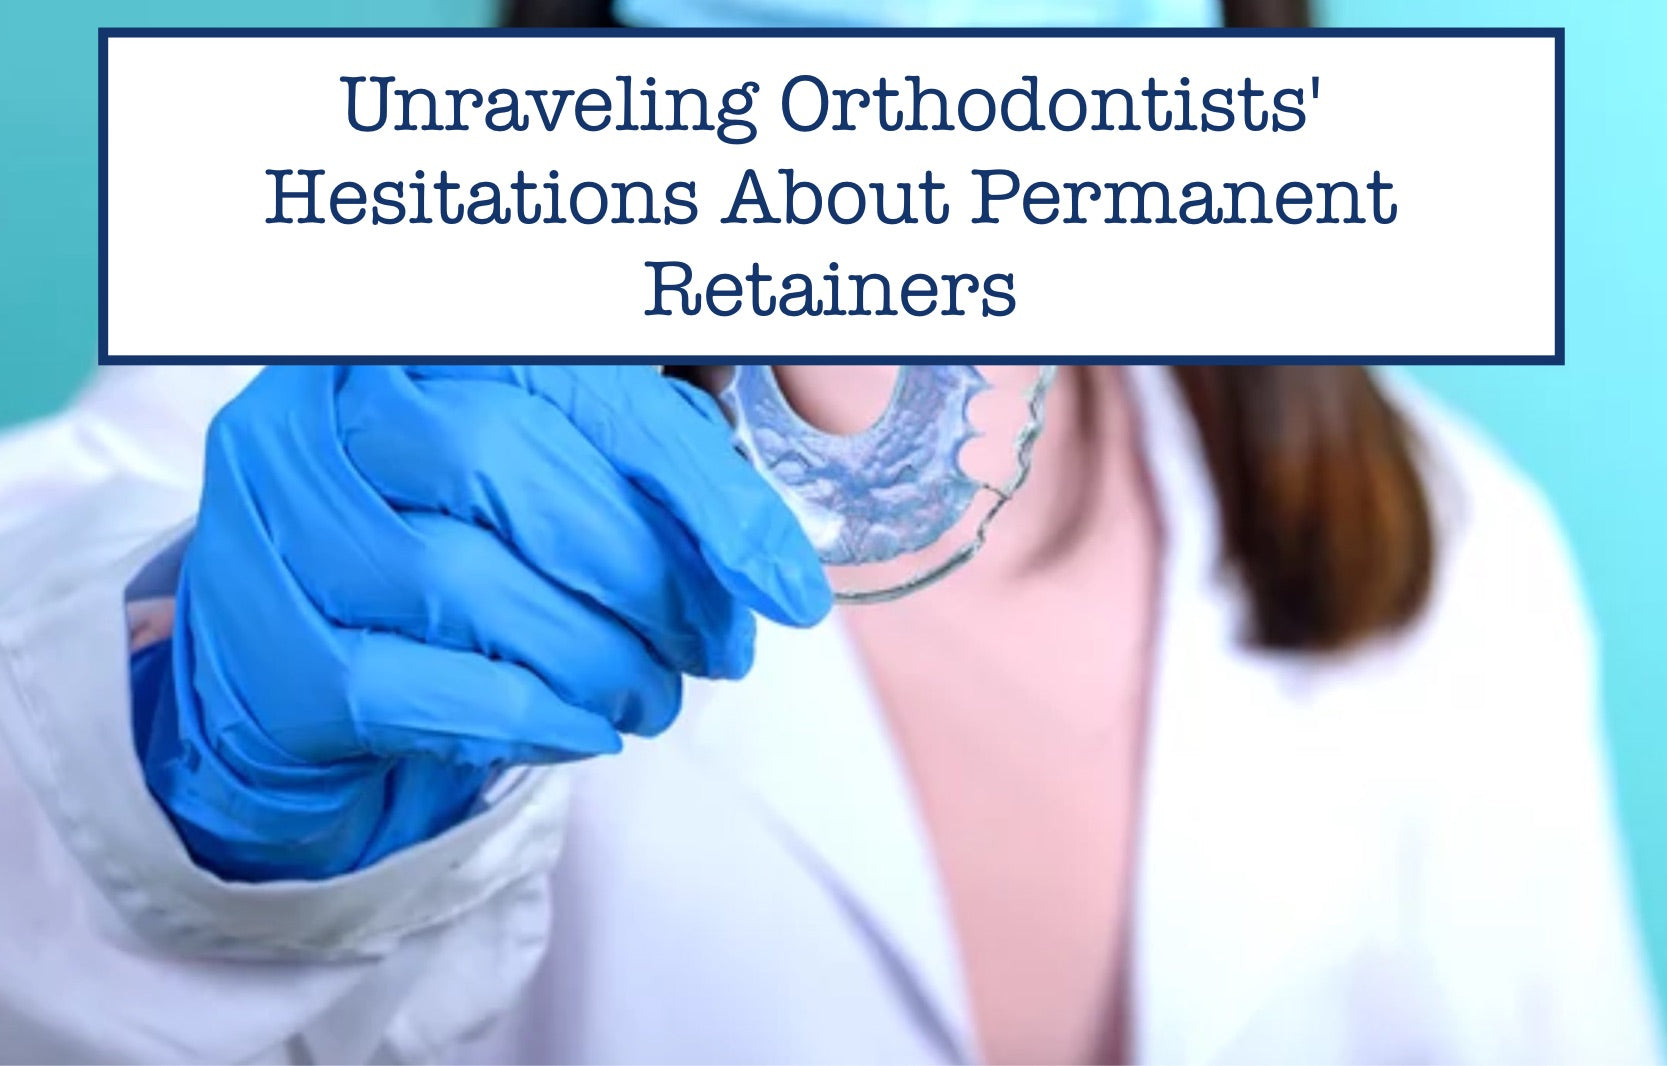 Unraveling Orthodontists' Hesitations About Permanent Retainers